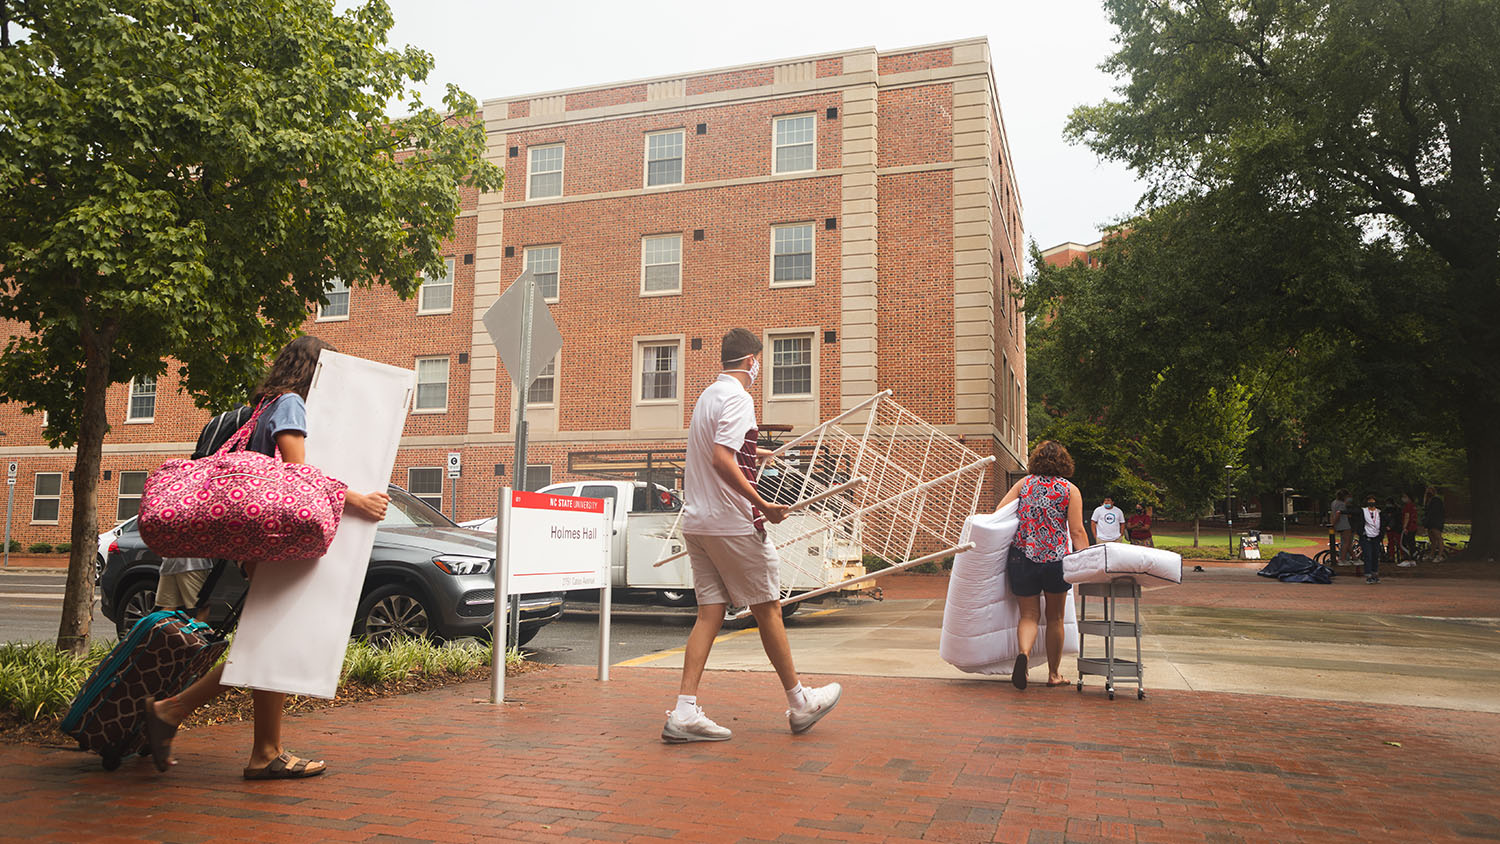 A new student carries luggage towards his residence hall